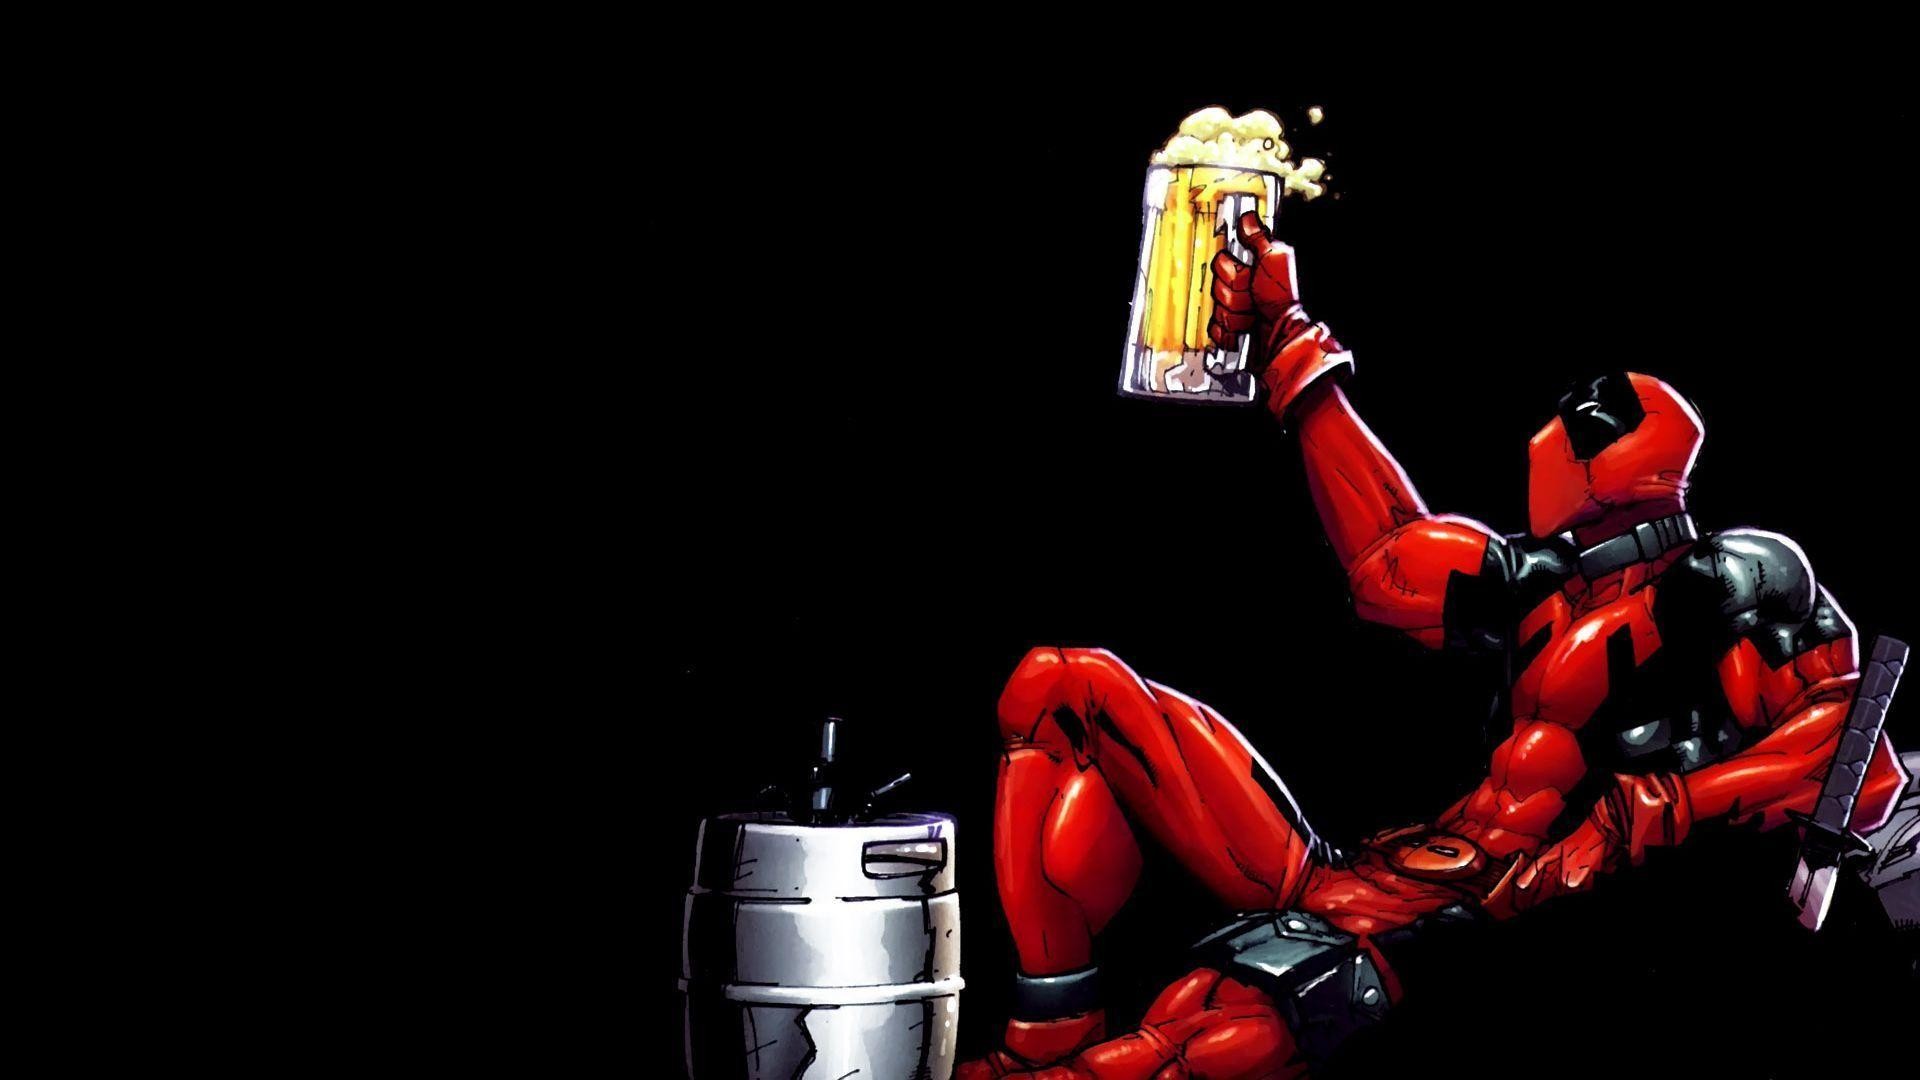 1920x1080 Movie : Download Funny Deadpool Wallpaper High Definition Hd Games .